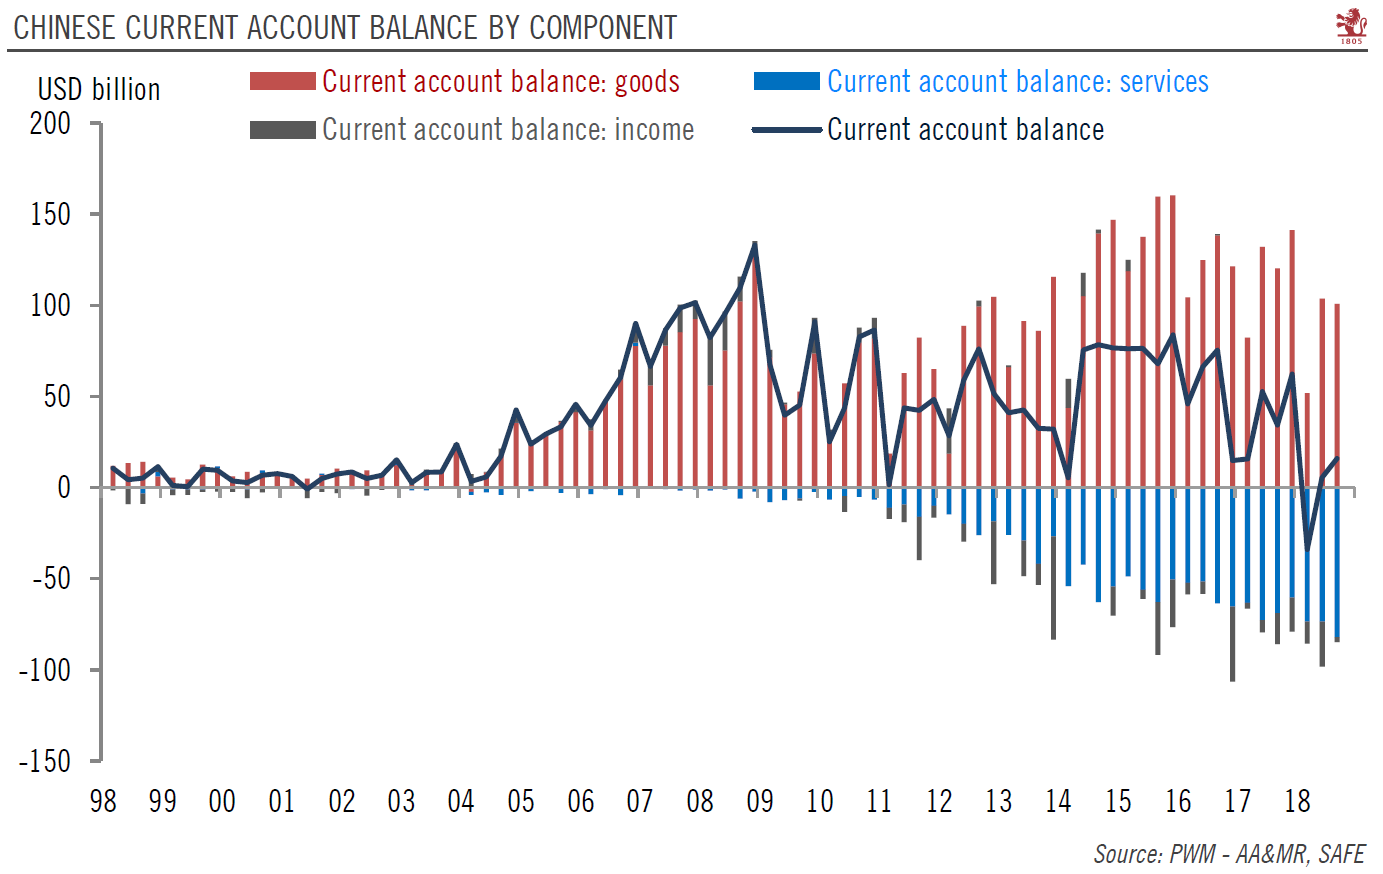 China’s days of current account surplus may be behind it